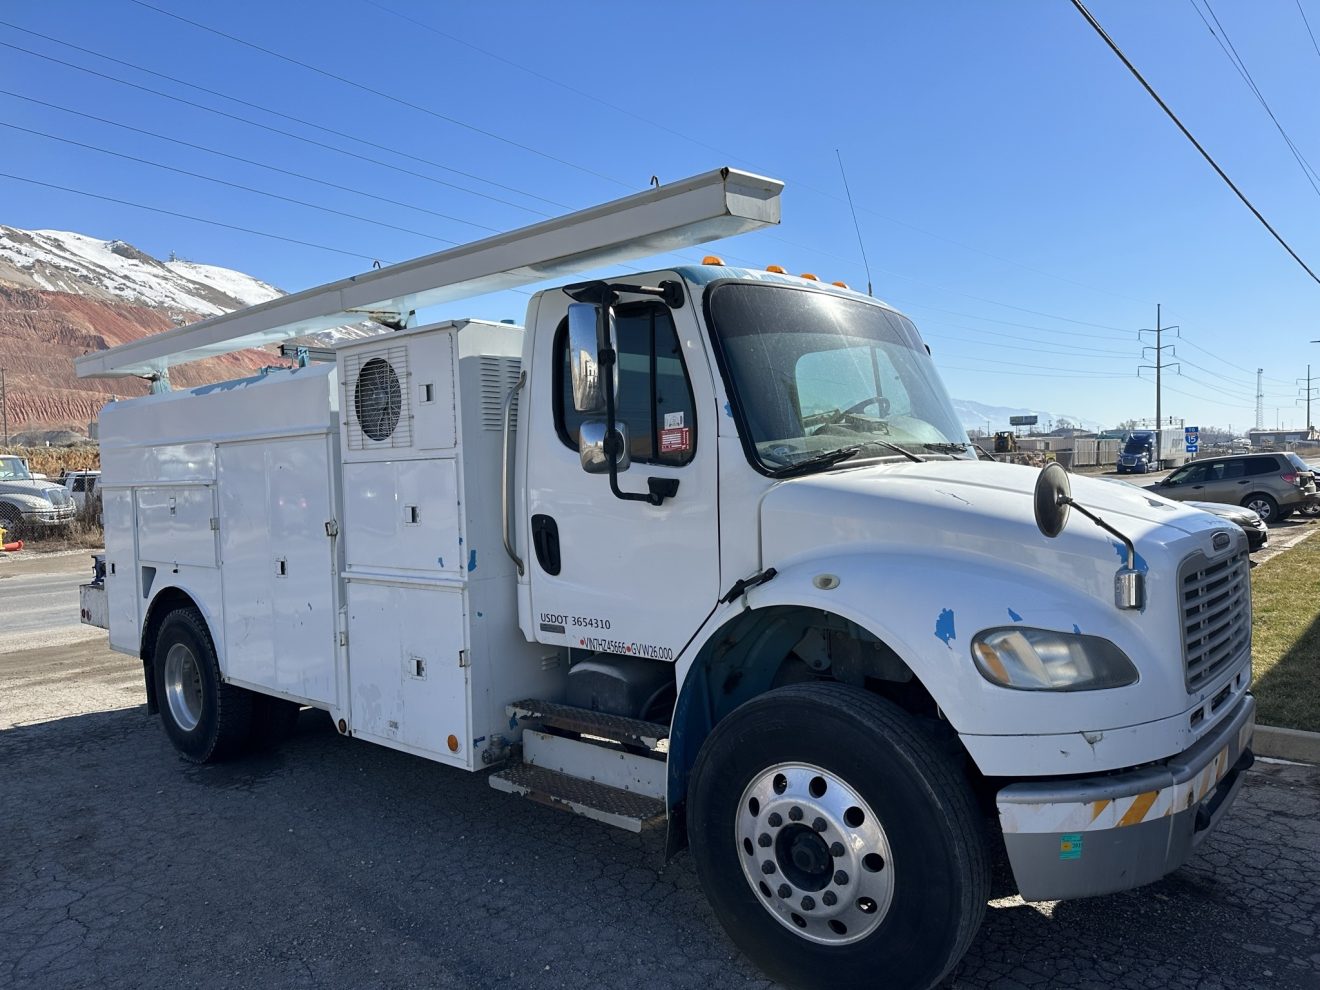 1997 FREIGHTLINER MODEL BUSINESS CLASS UTILITY SERVICE TRUCK